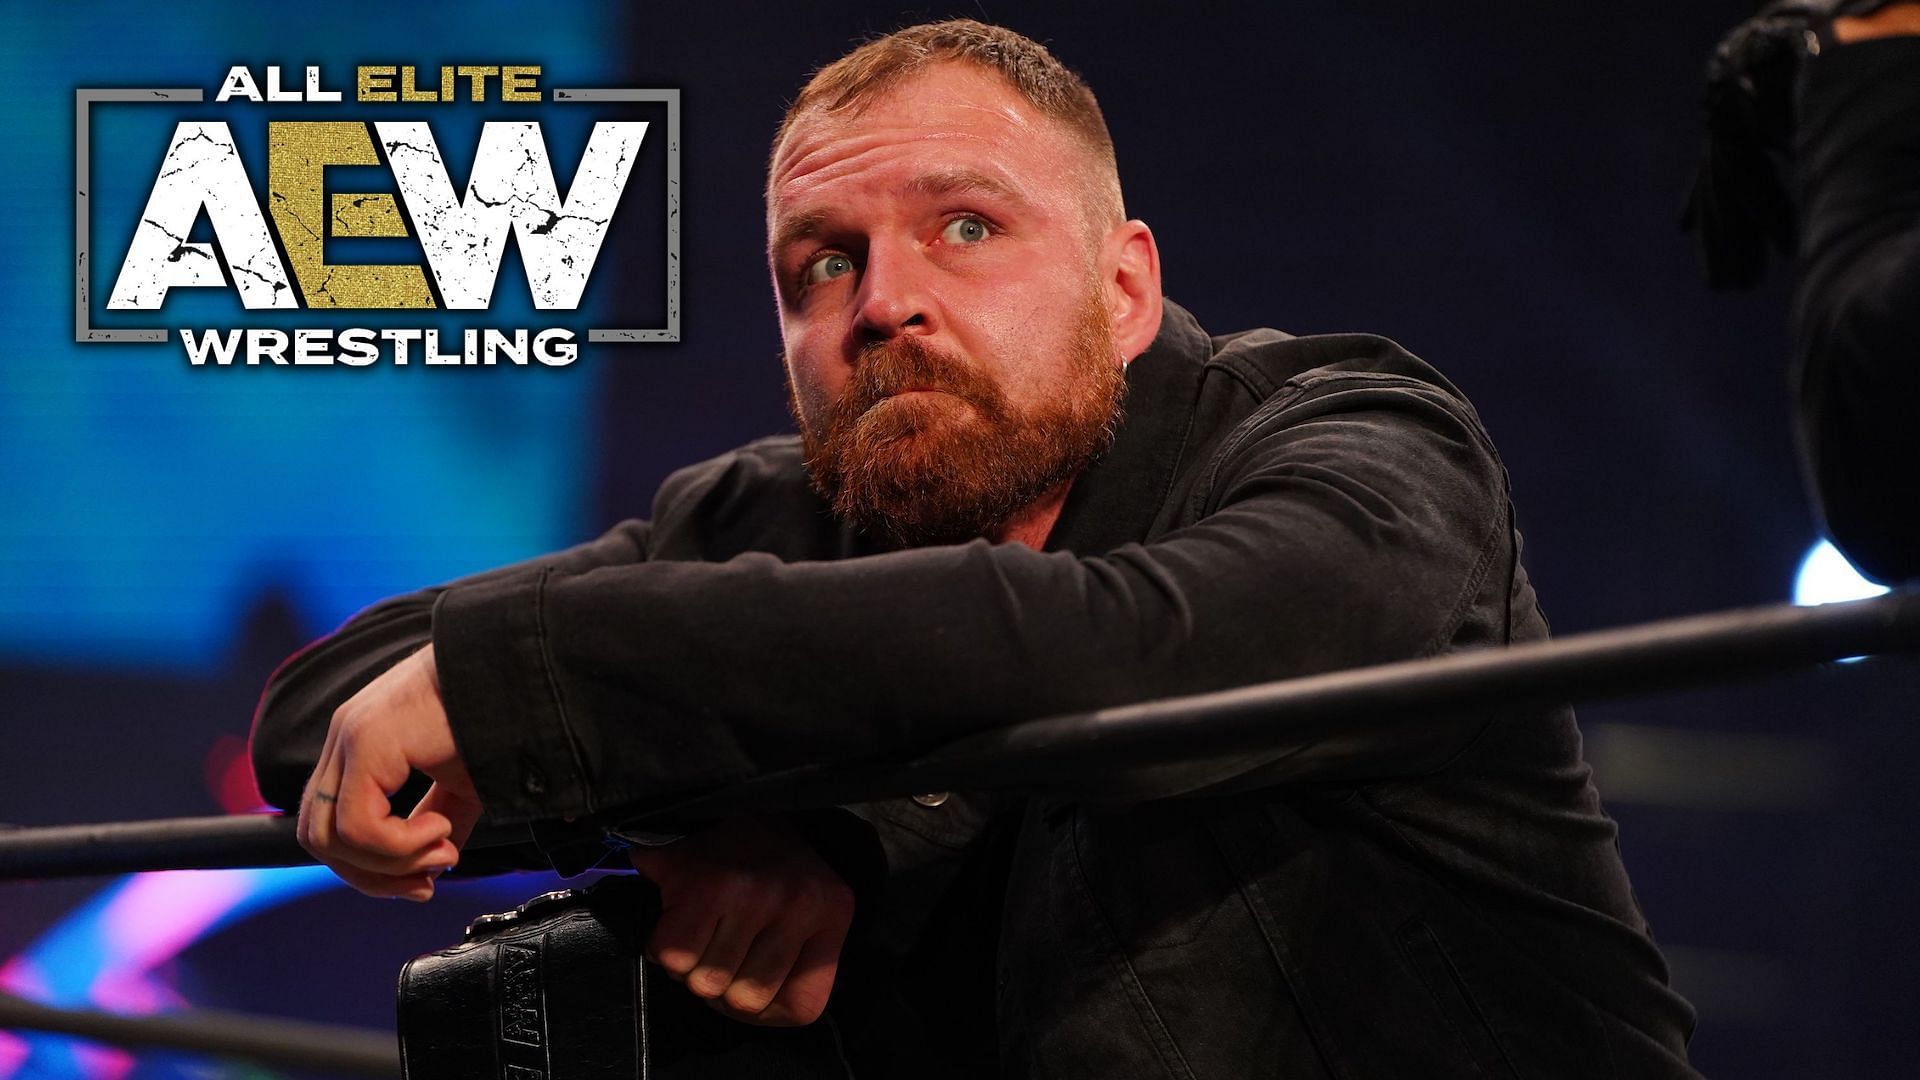 Jon Moxley had some interesting comments this week